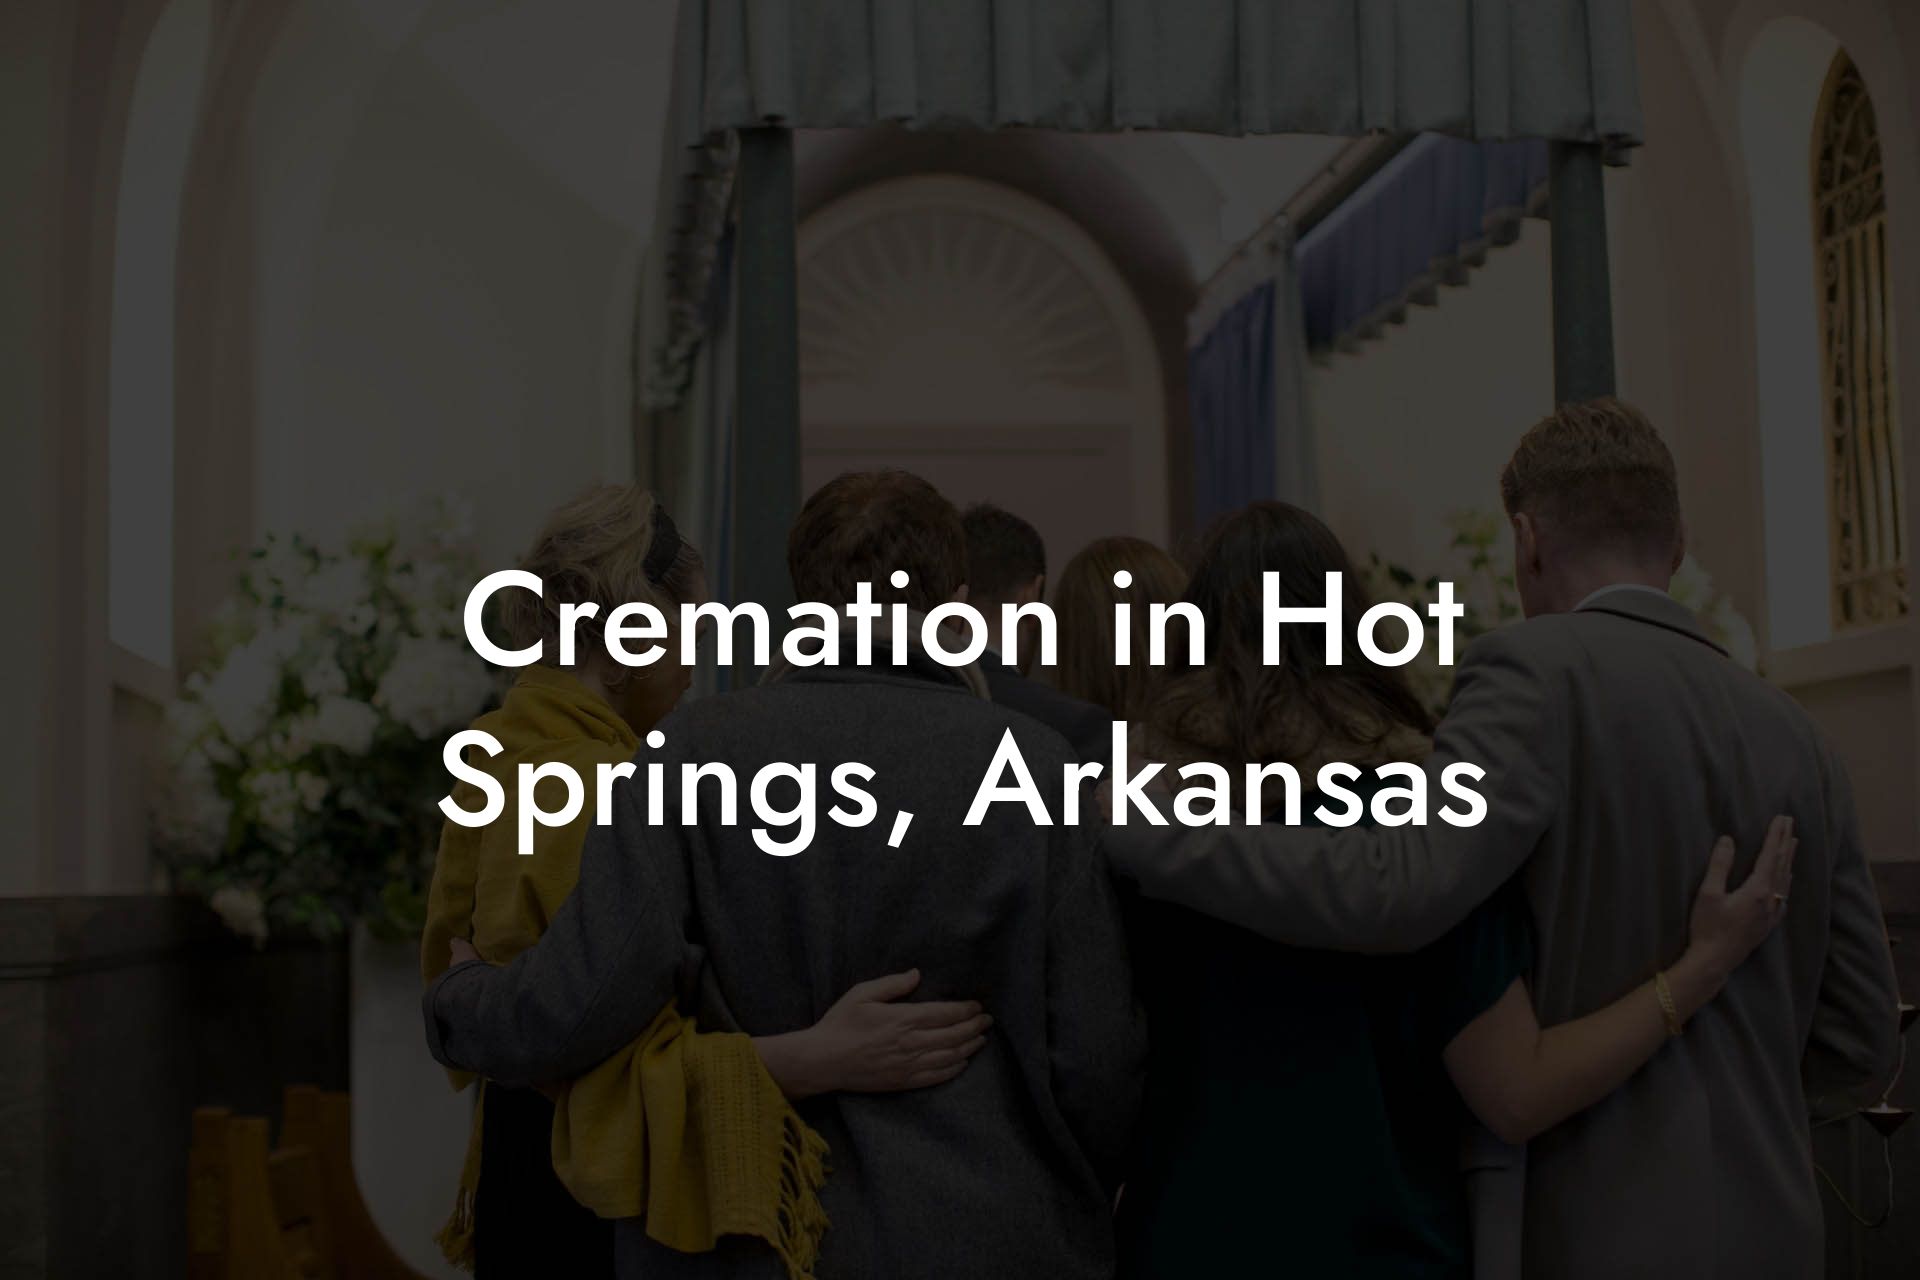 Cremation in Hot Springs, Arkansas